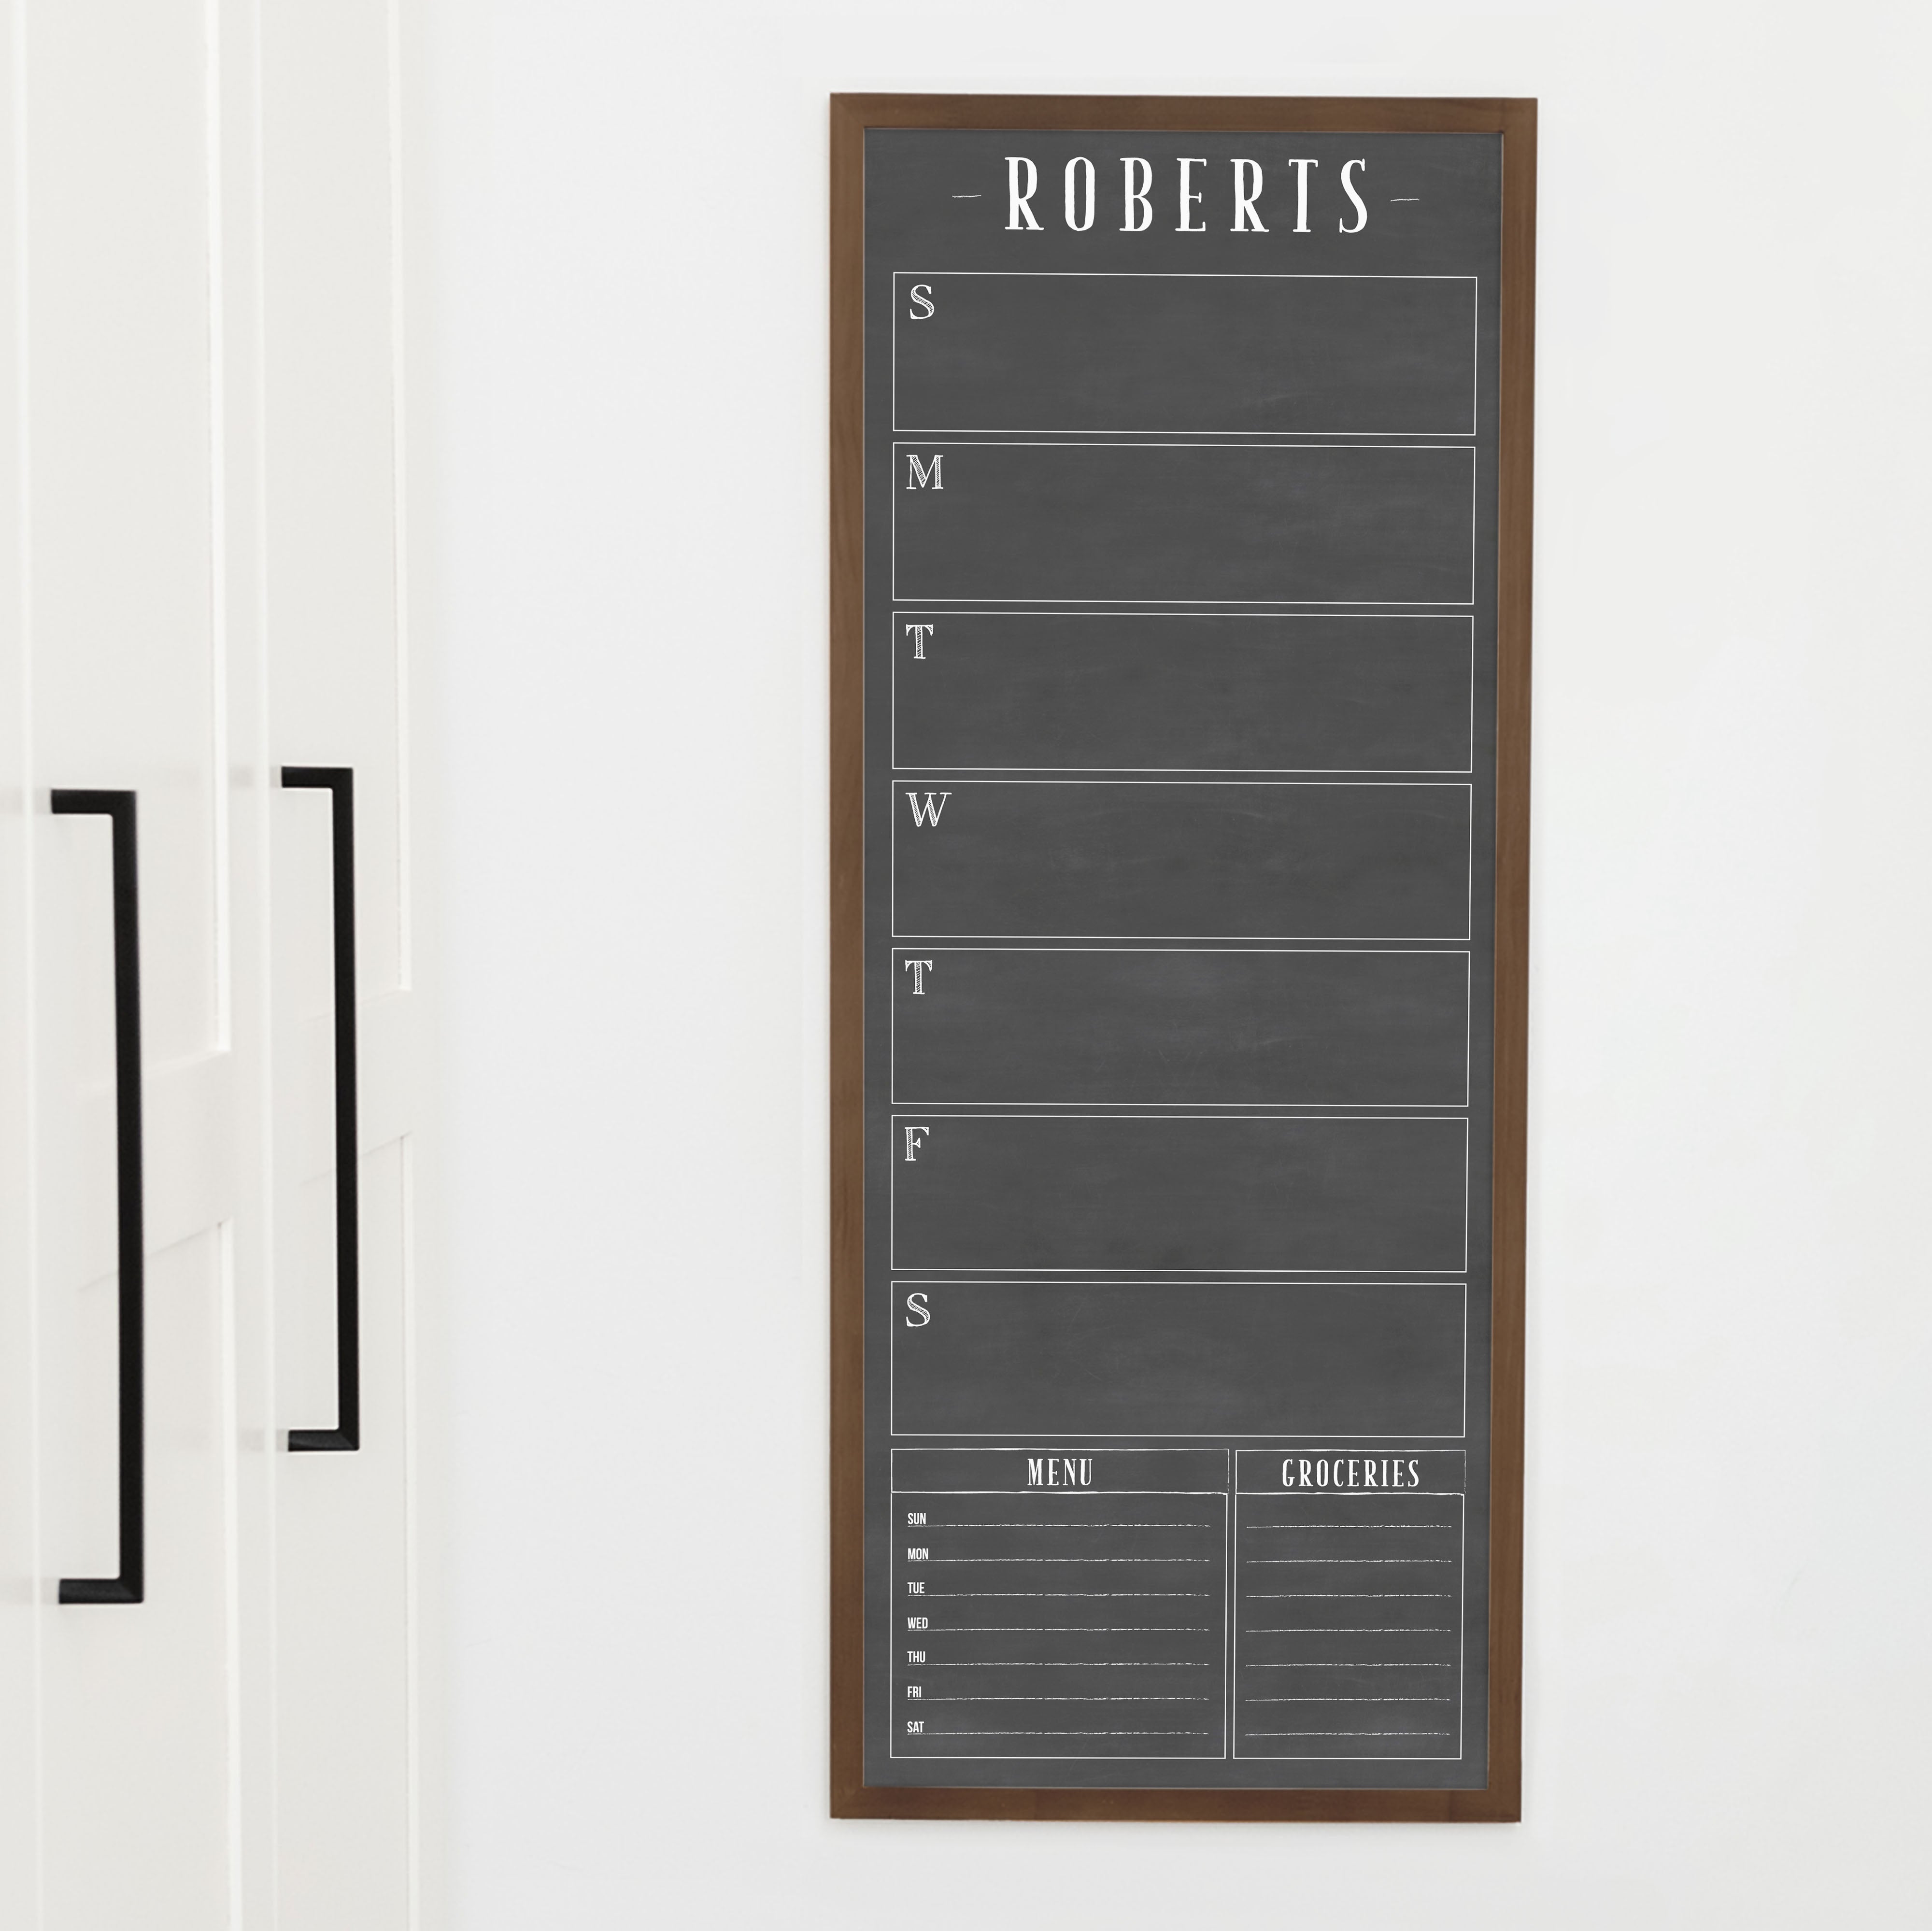 A framed slim dry-erase weekly calender with a faux chalkboard look hanging on the wall